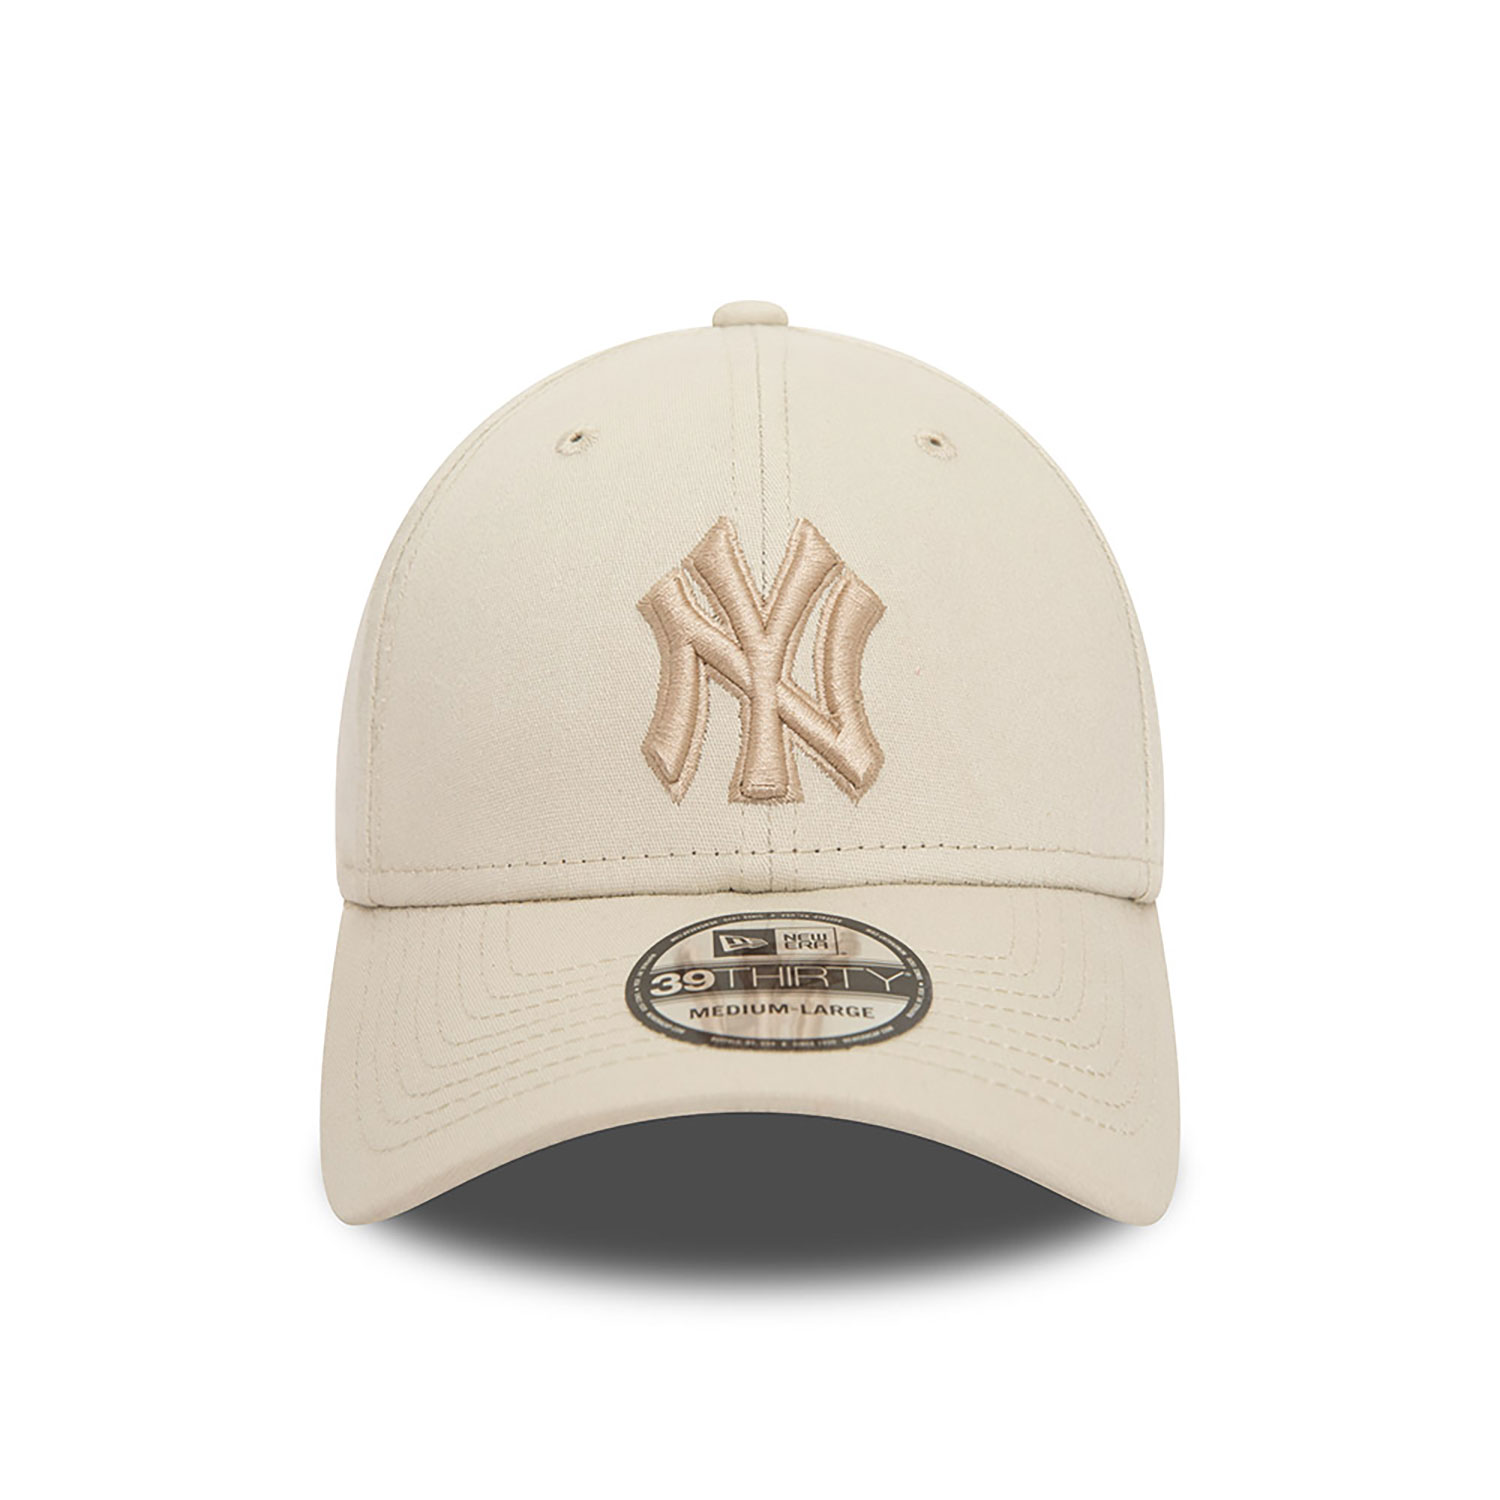 New York Yankees MLB Outline Stone 39THIRTY Stretch Fit Cap